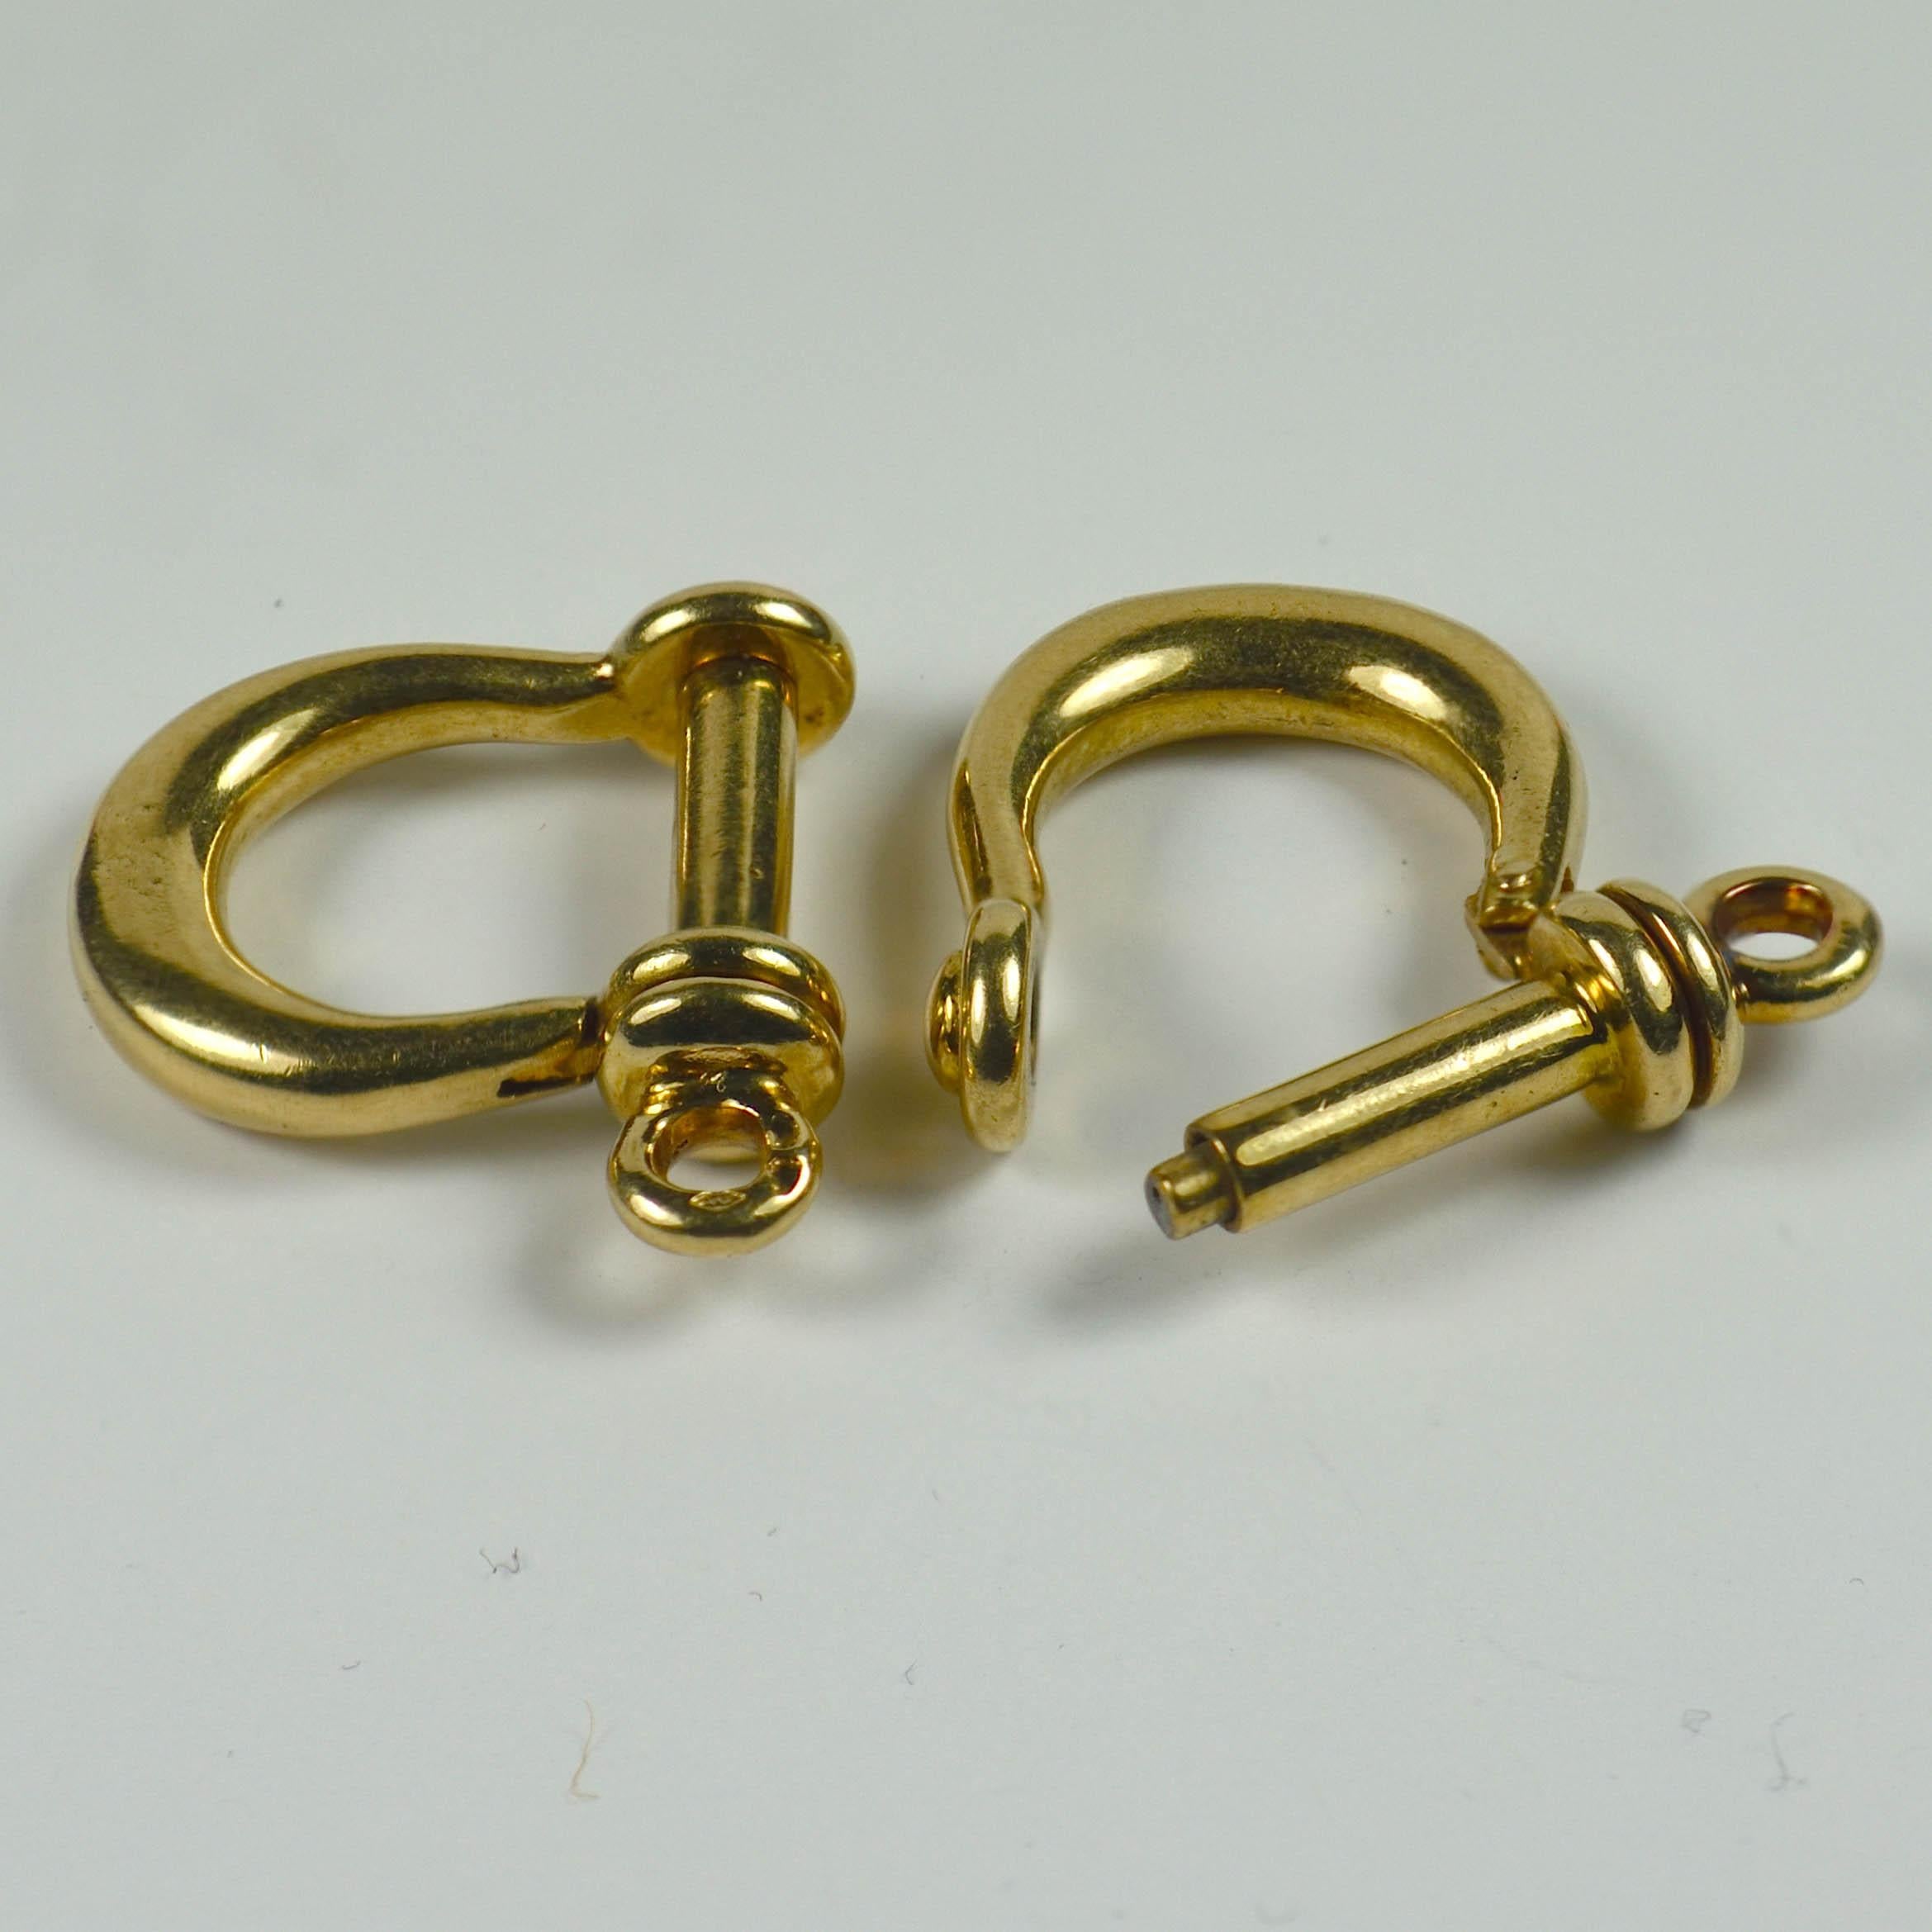 A fantastic pair of 18 karat gold cufflinks designed as boating shackles. Made by Gaetan De Percin, a jewellery maker used by Hermes and Tiffany. 
Stamped with French marks for 18k gold and De Percin.
Measurements: 0.75